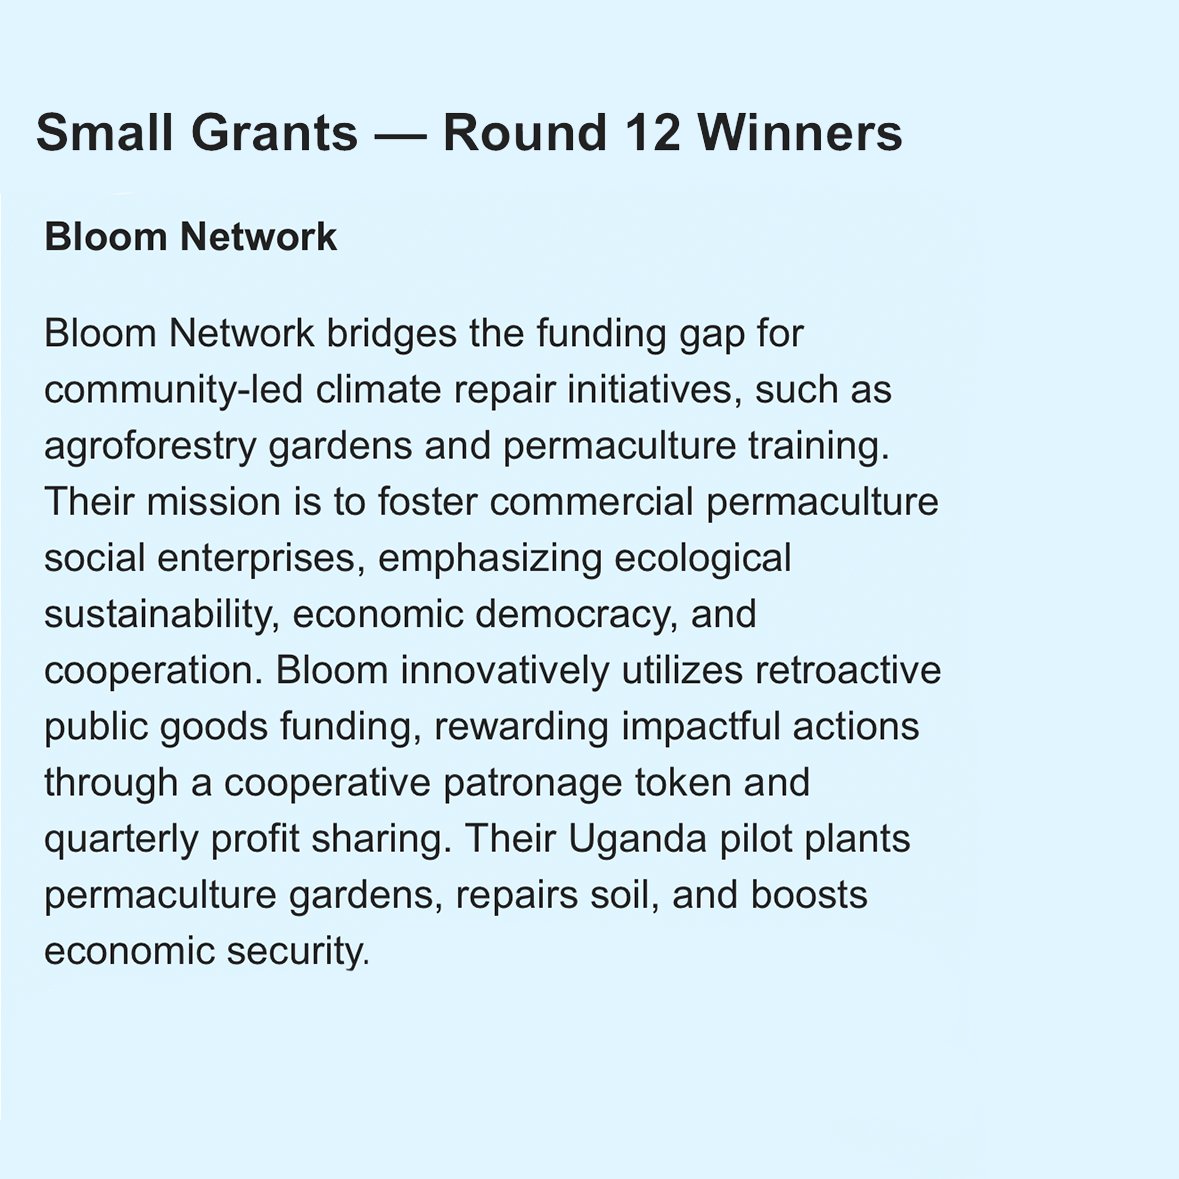 .@OurBloomNetwork supports community-led climate repair through agroforestry and permaculture, impacting over 70,000 individuals. It utilizes innovative funding models like a cooperative patronage token to sustain and expand its ecological projects.